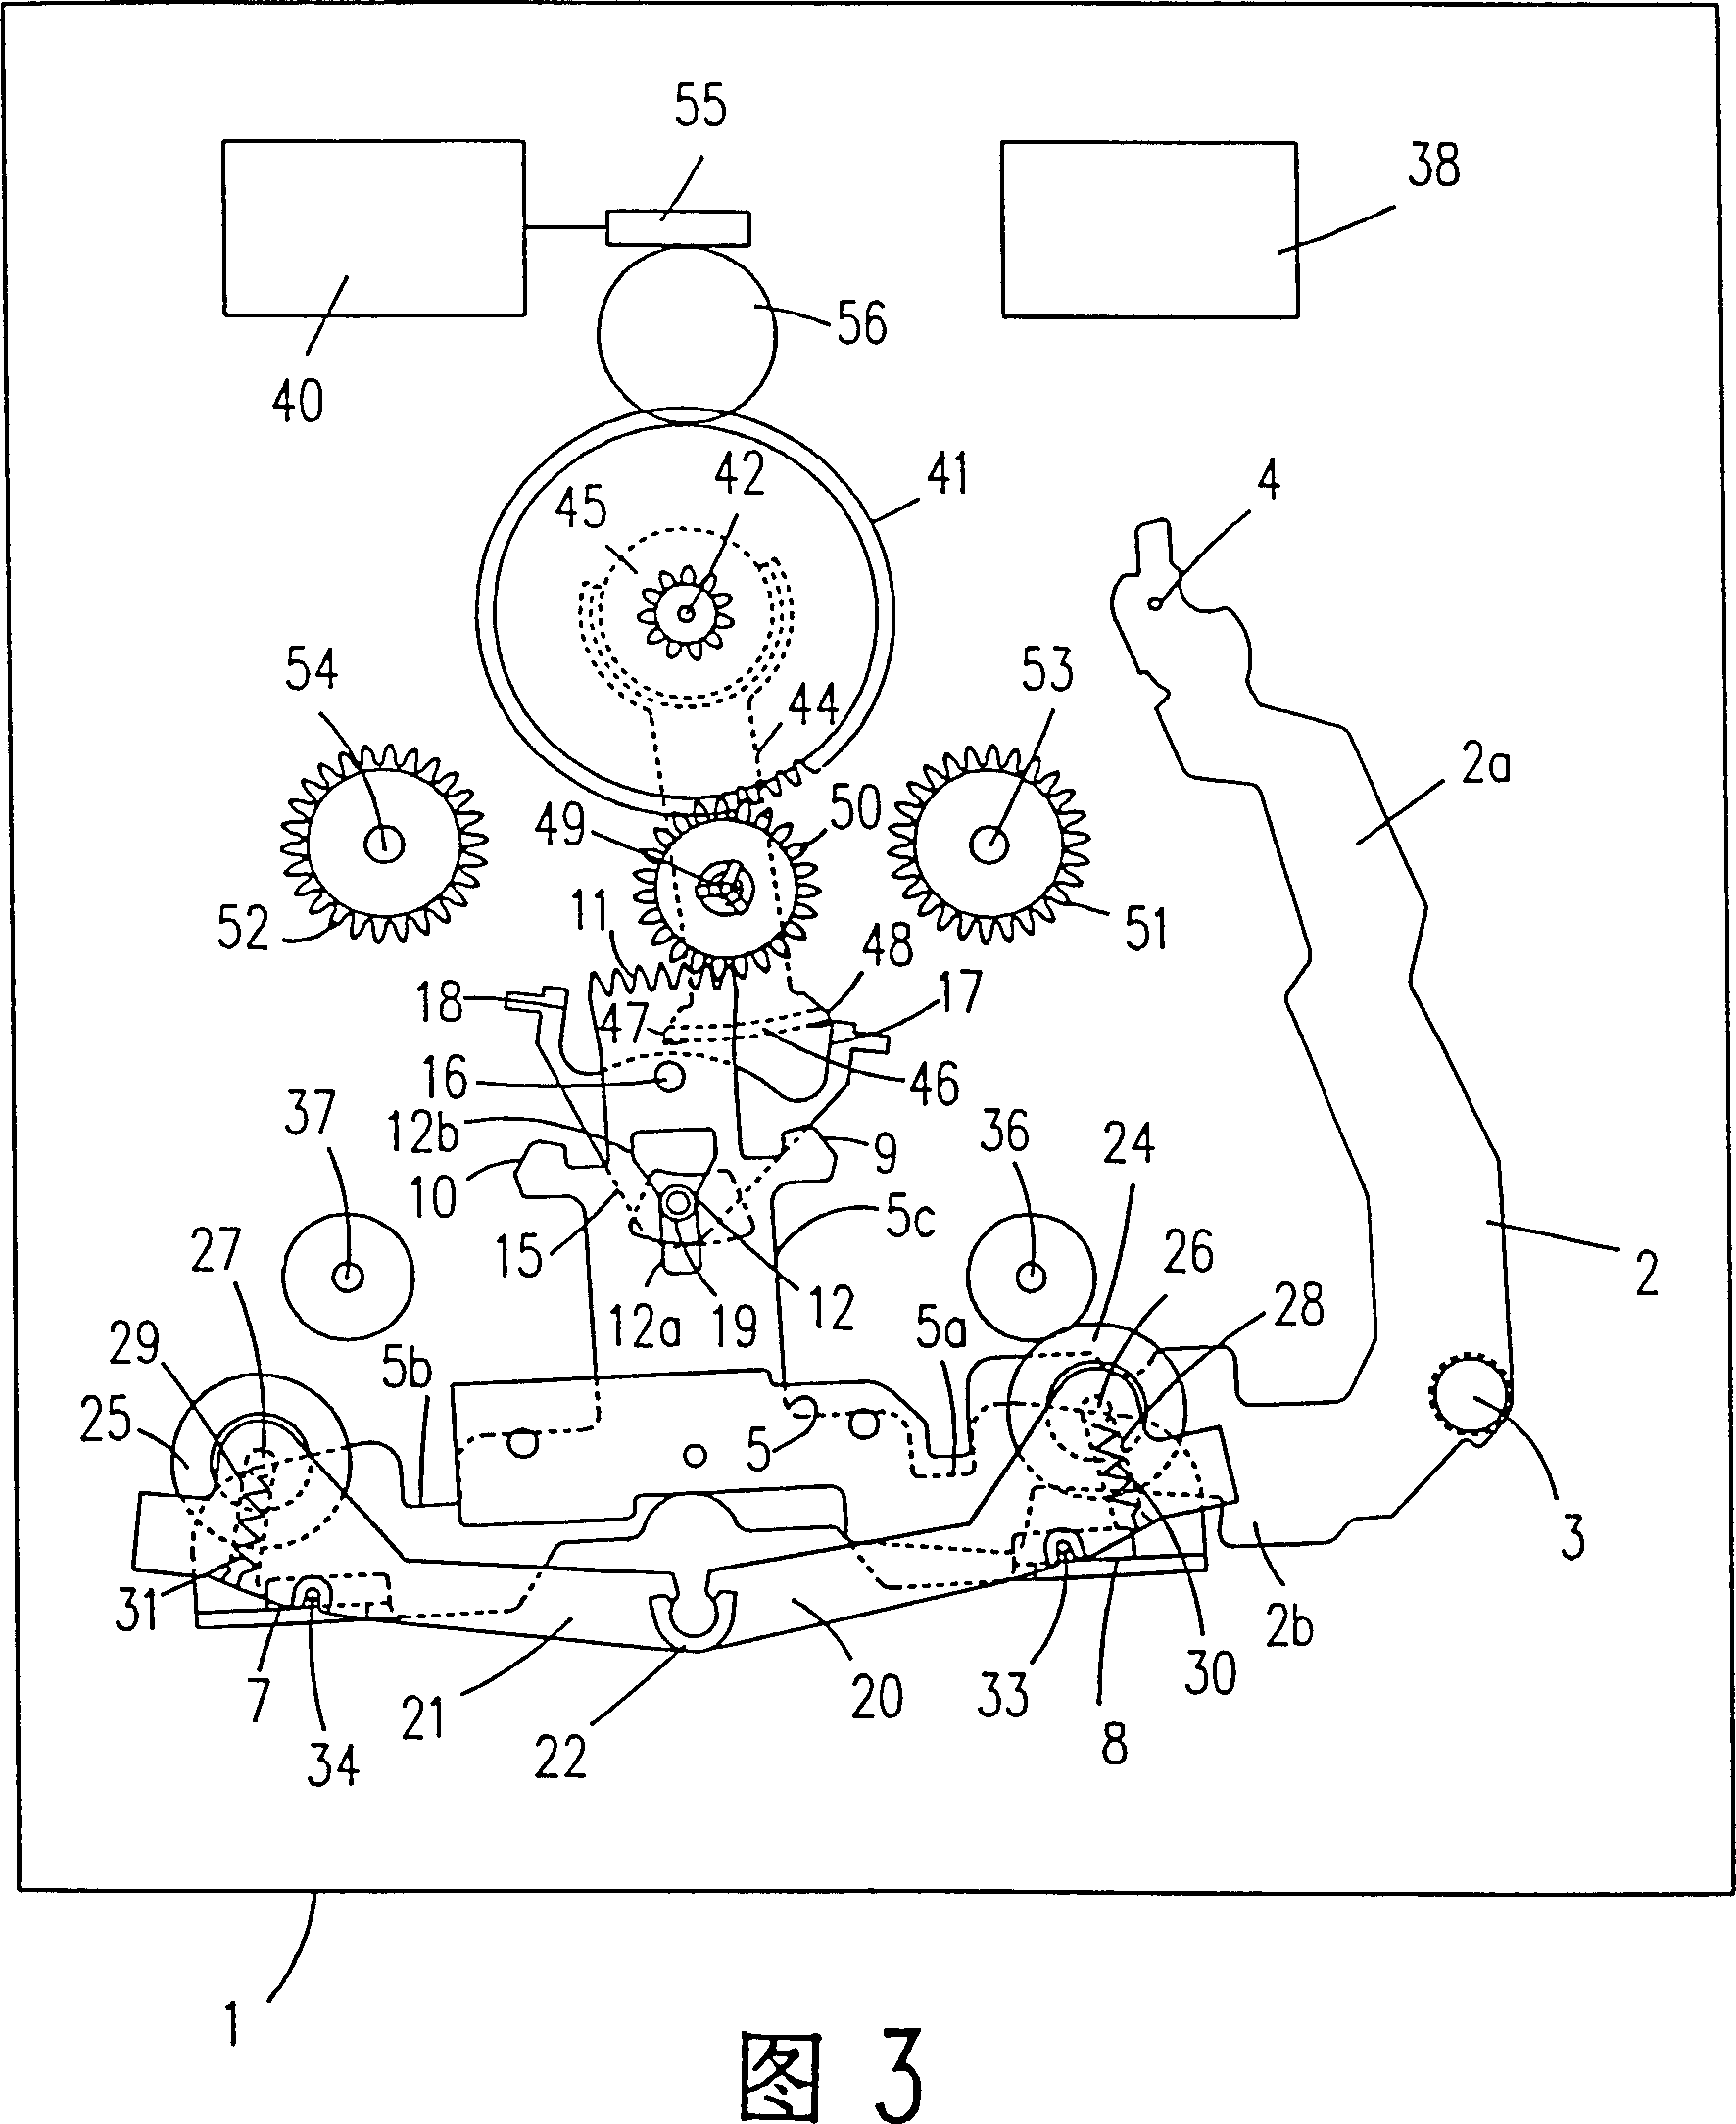 Auto-reverse tape deck comprising switching device